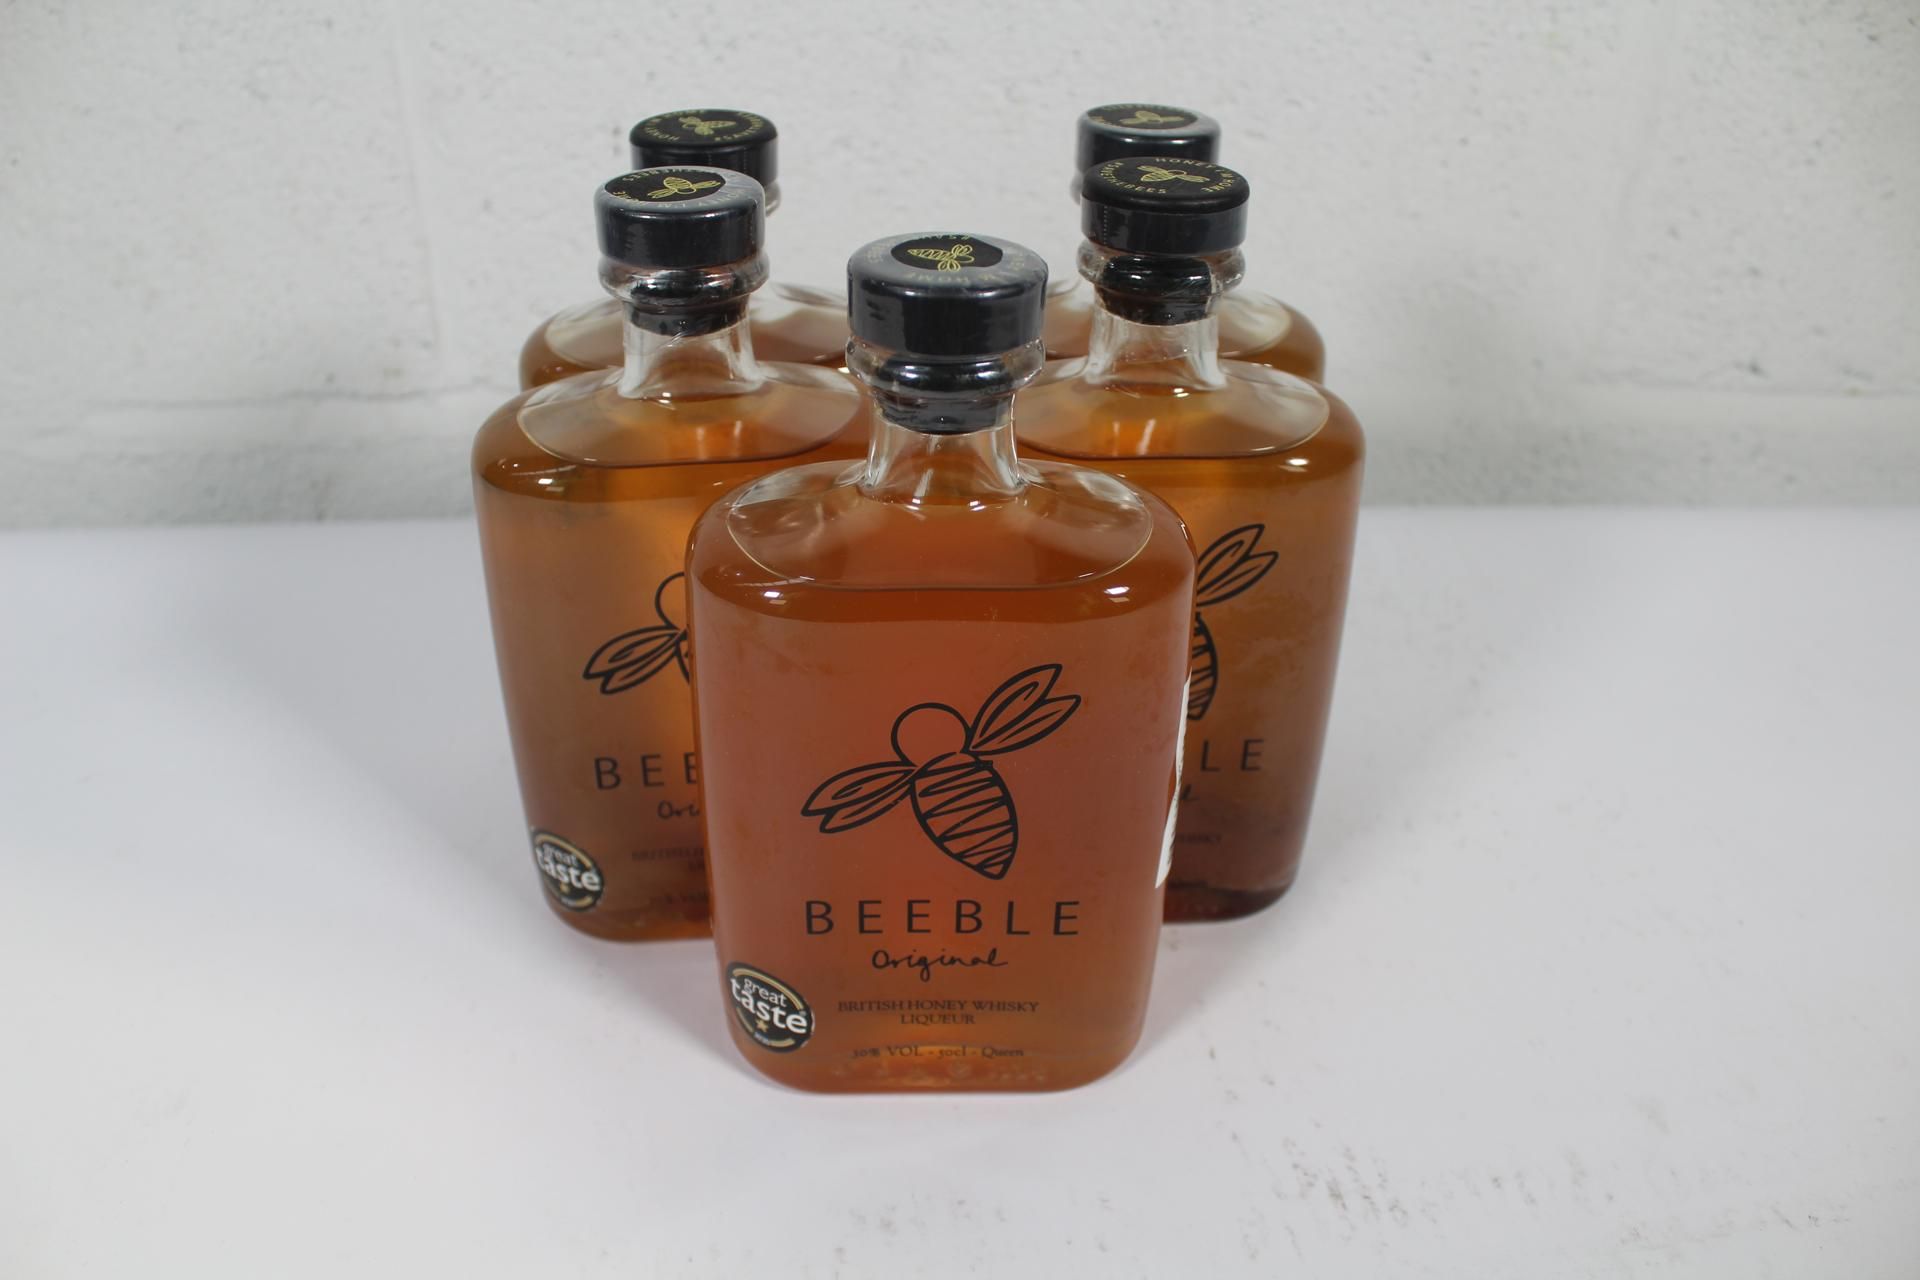 Five bottles of Beeble Original British Honey Whisky Liqueur (5 x 500ml) (Over 18s only).